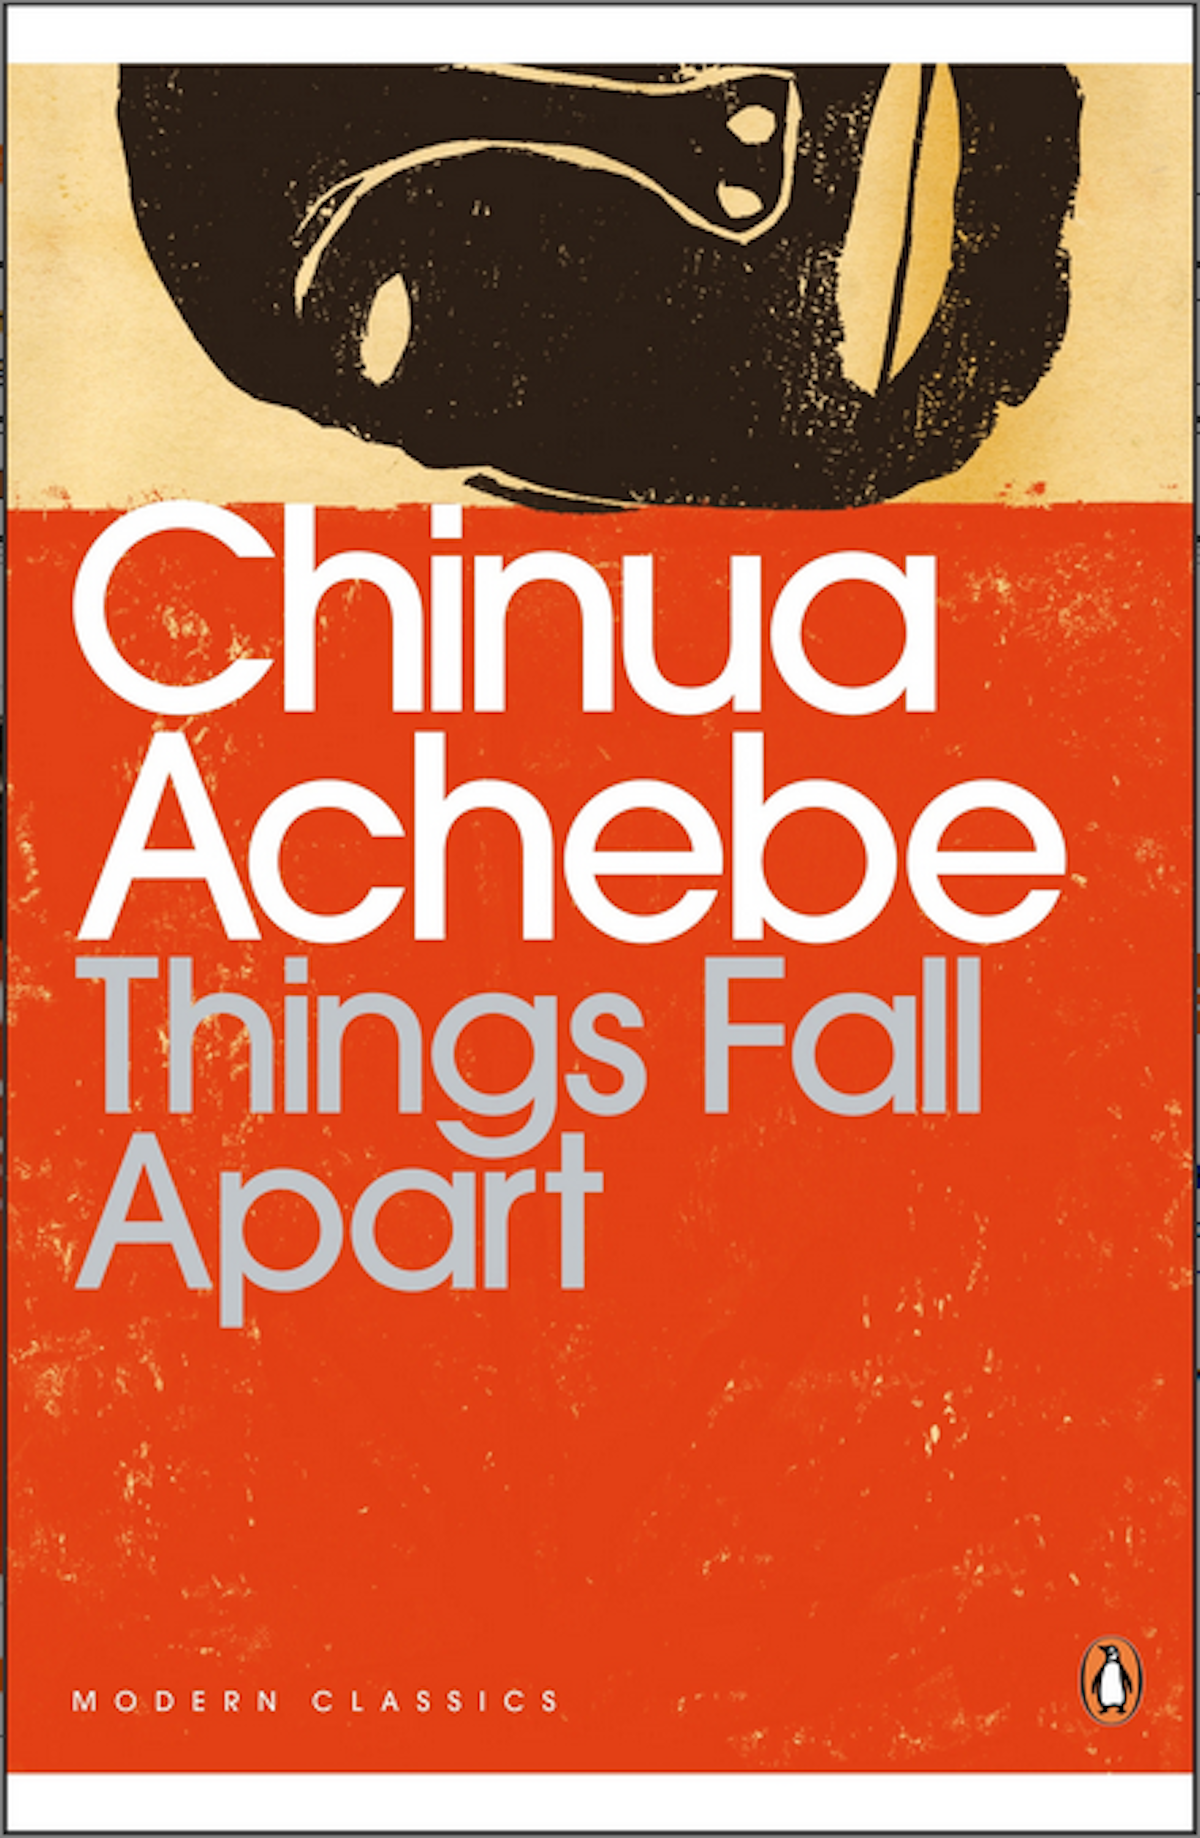 Five African Novels To Read Before You Die